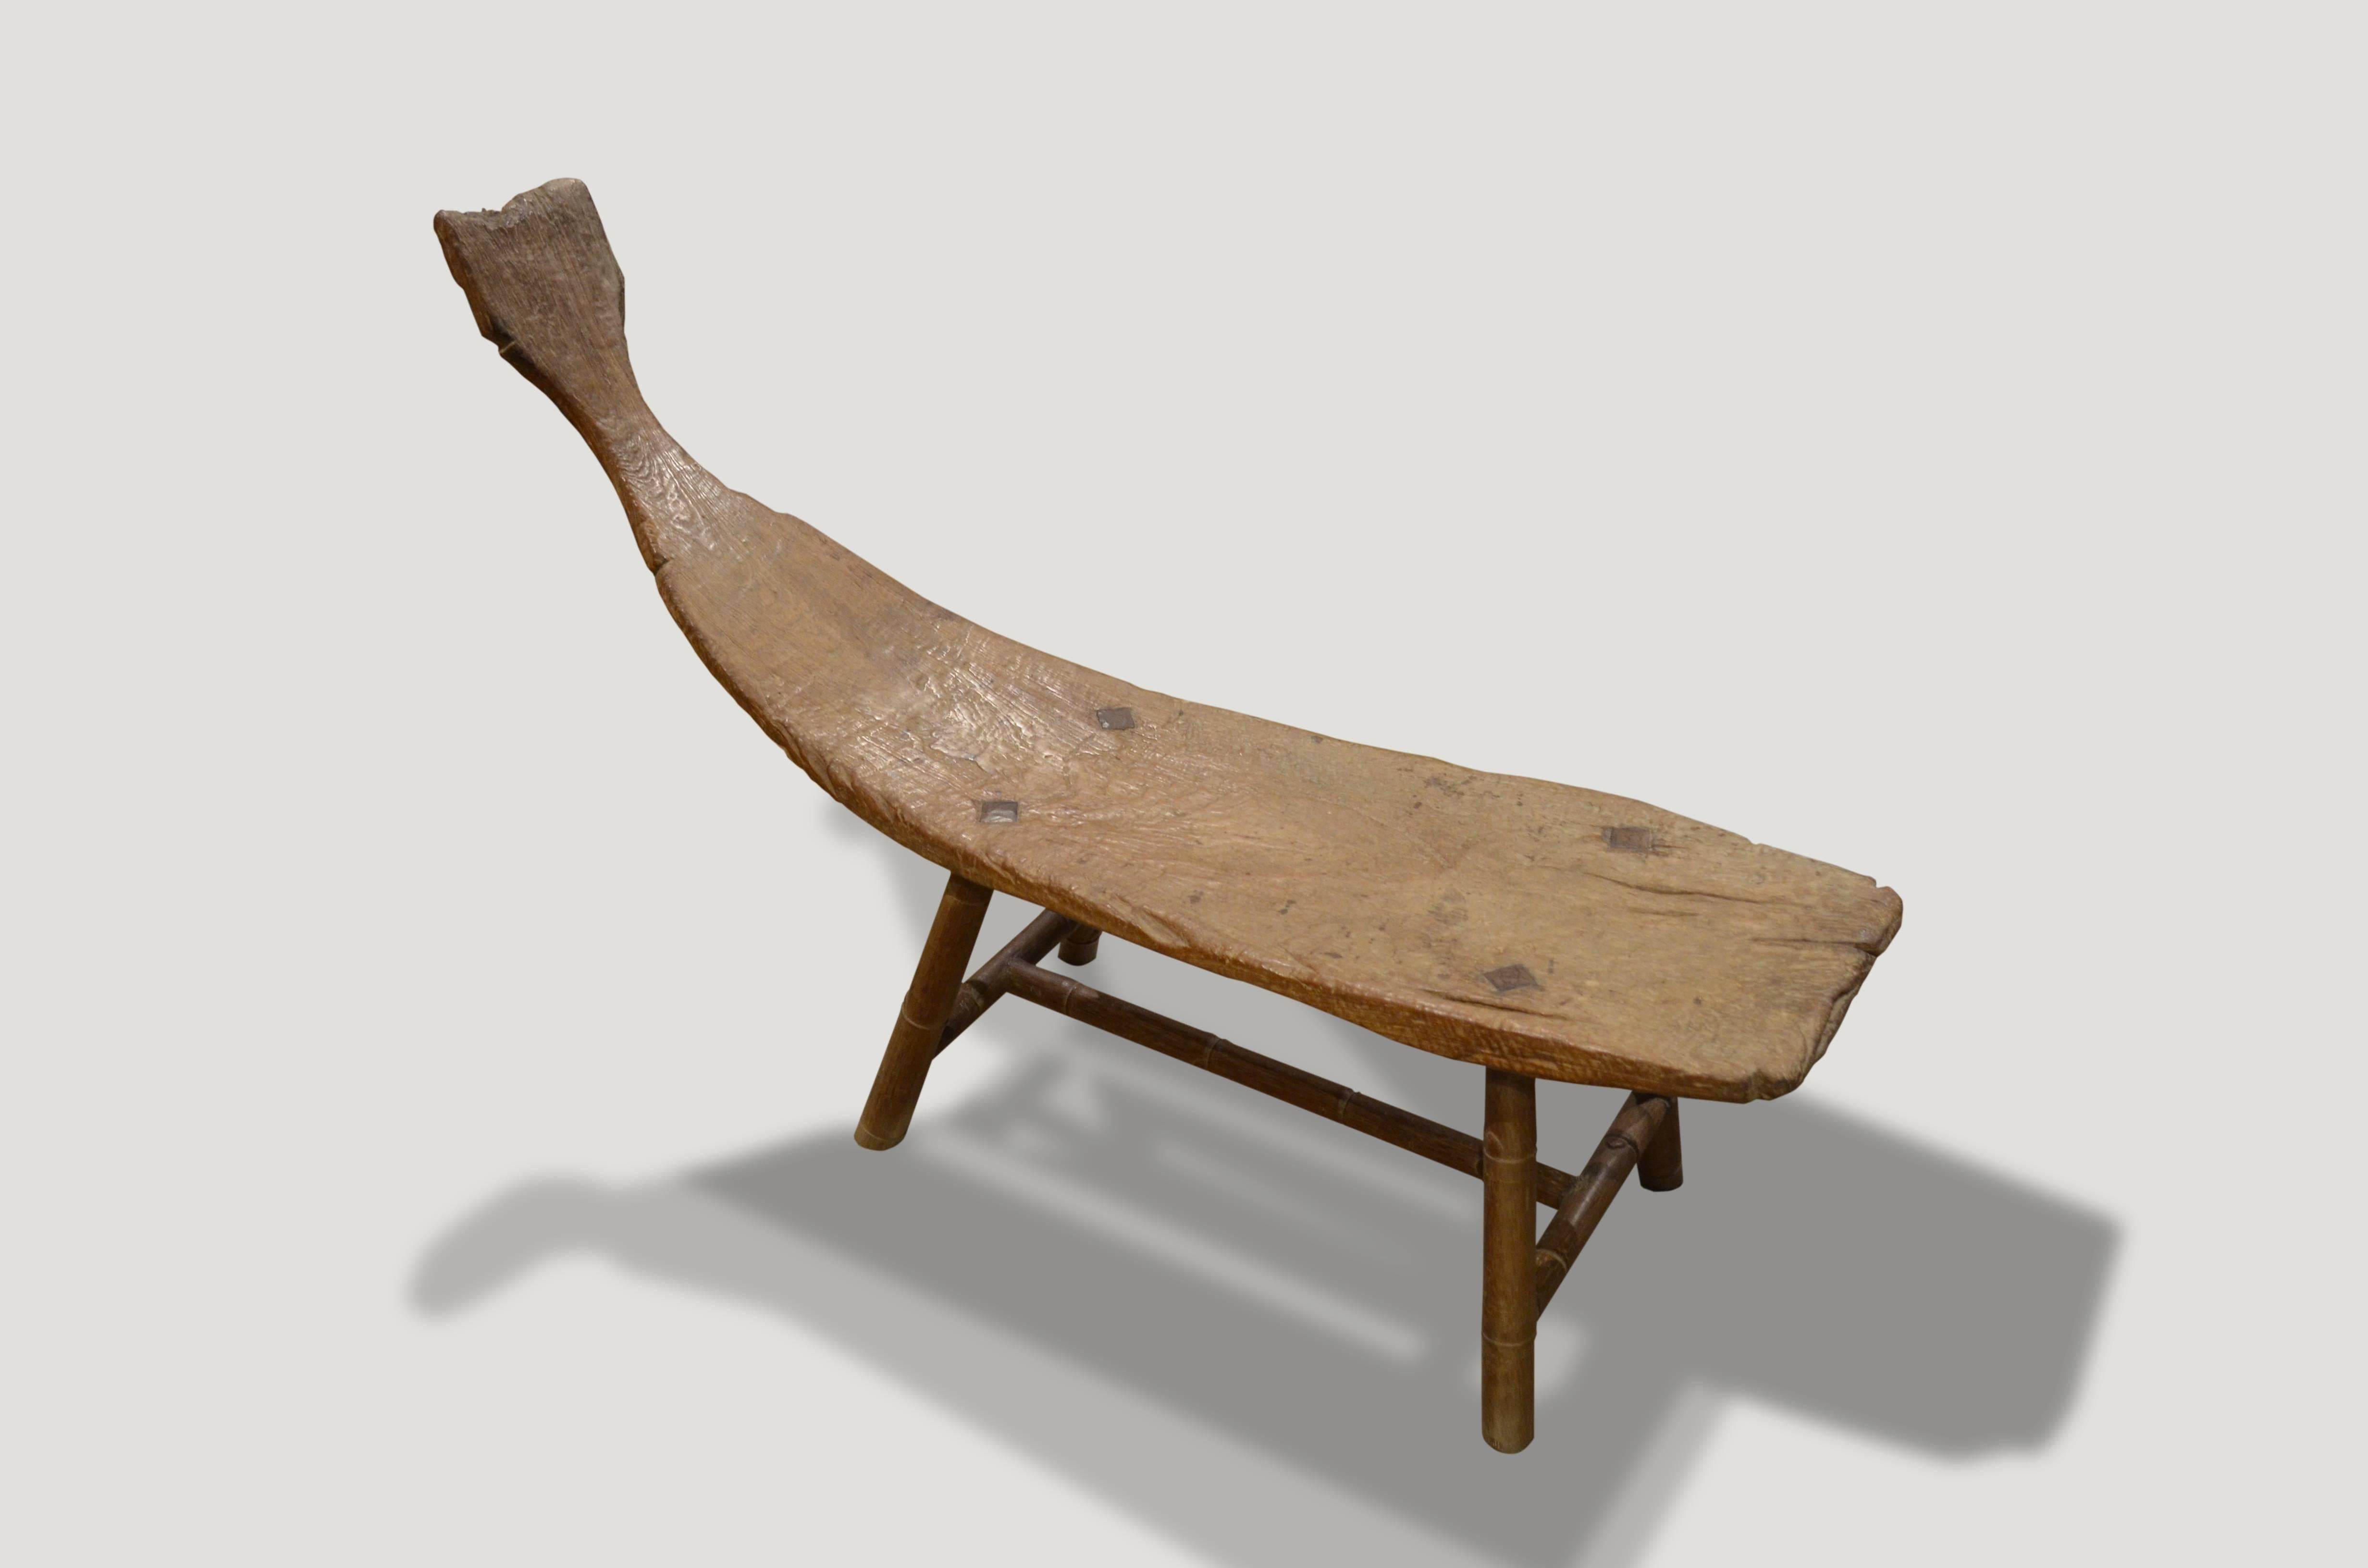 For the primitive collector. This stunning bench is hand-carved from a single teakwood root from Madura. Beautiful antique bamboo legs in contrast. Rare.

This bench was sourced in the spirit of wabi-sabi, a Japanese philosophy that beauty can be